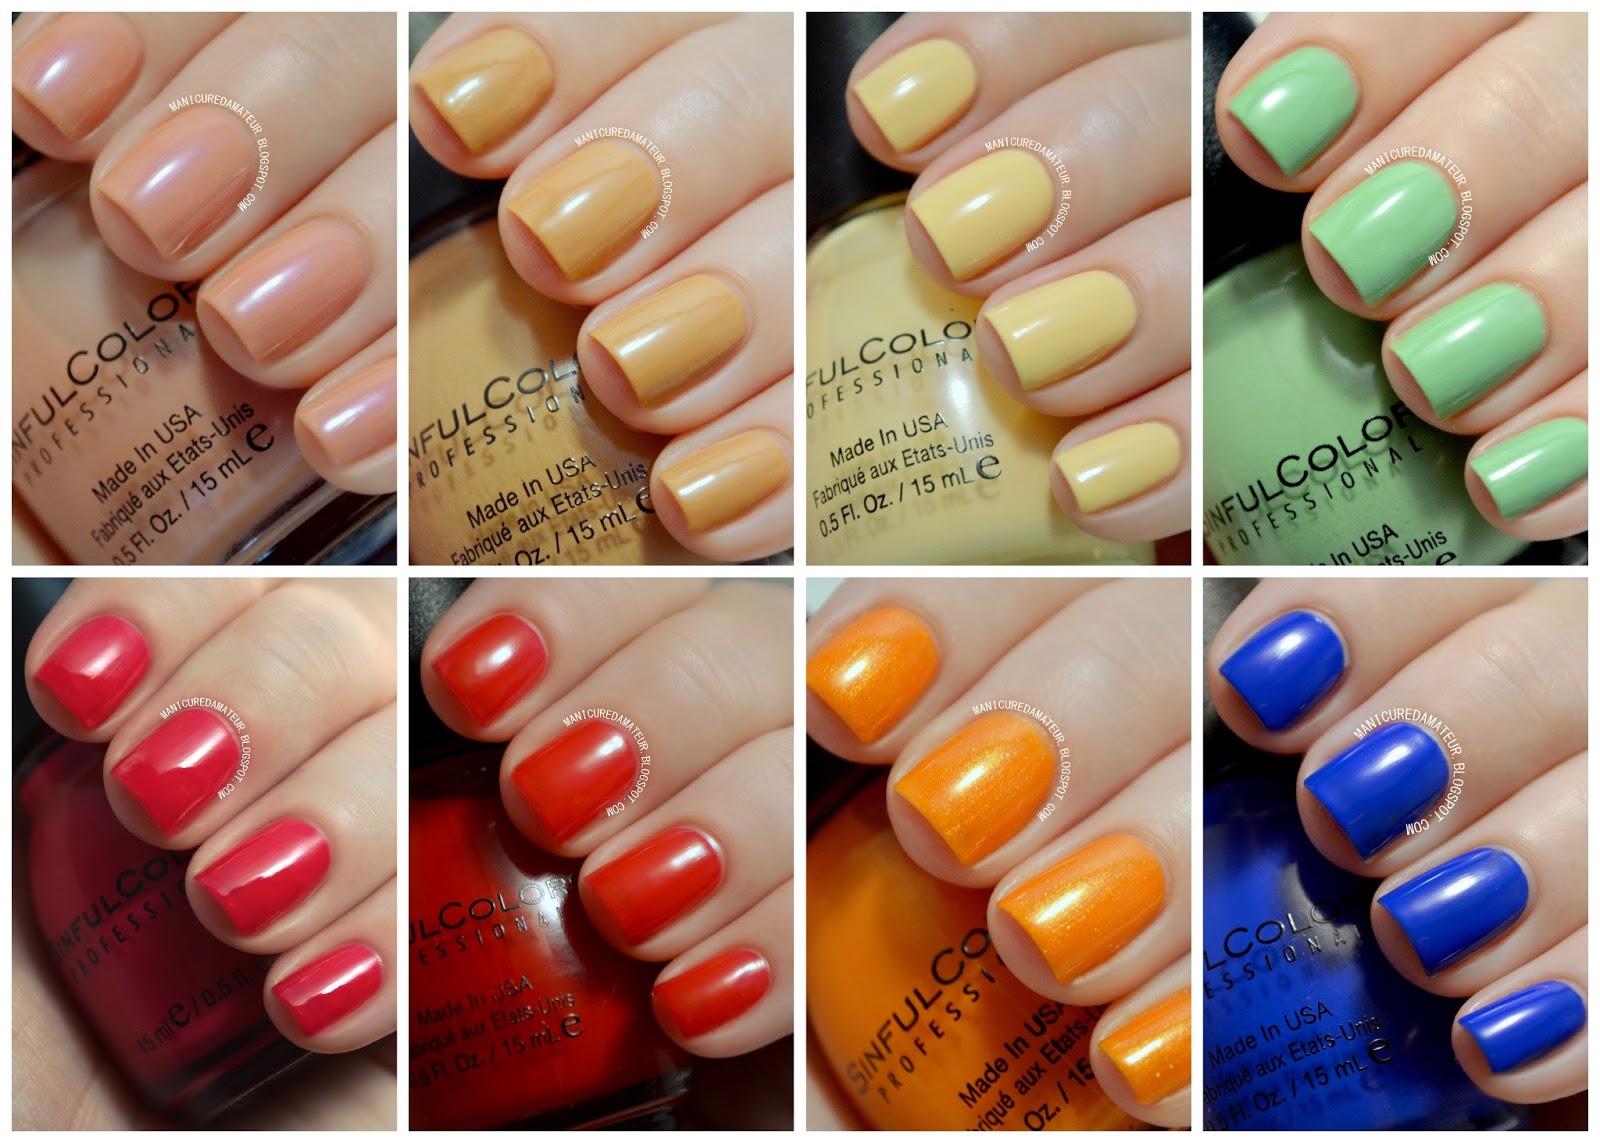 9. Sinful Colors Professional Nail Polish in "Queen of Beauty" - wide 5